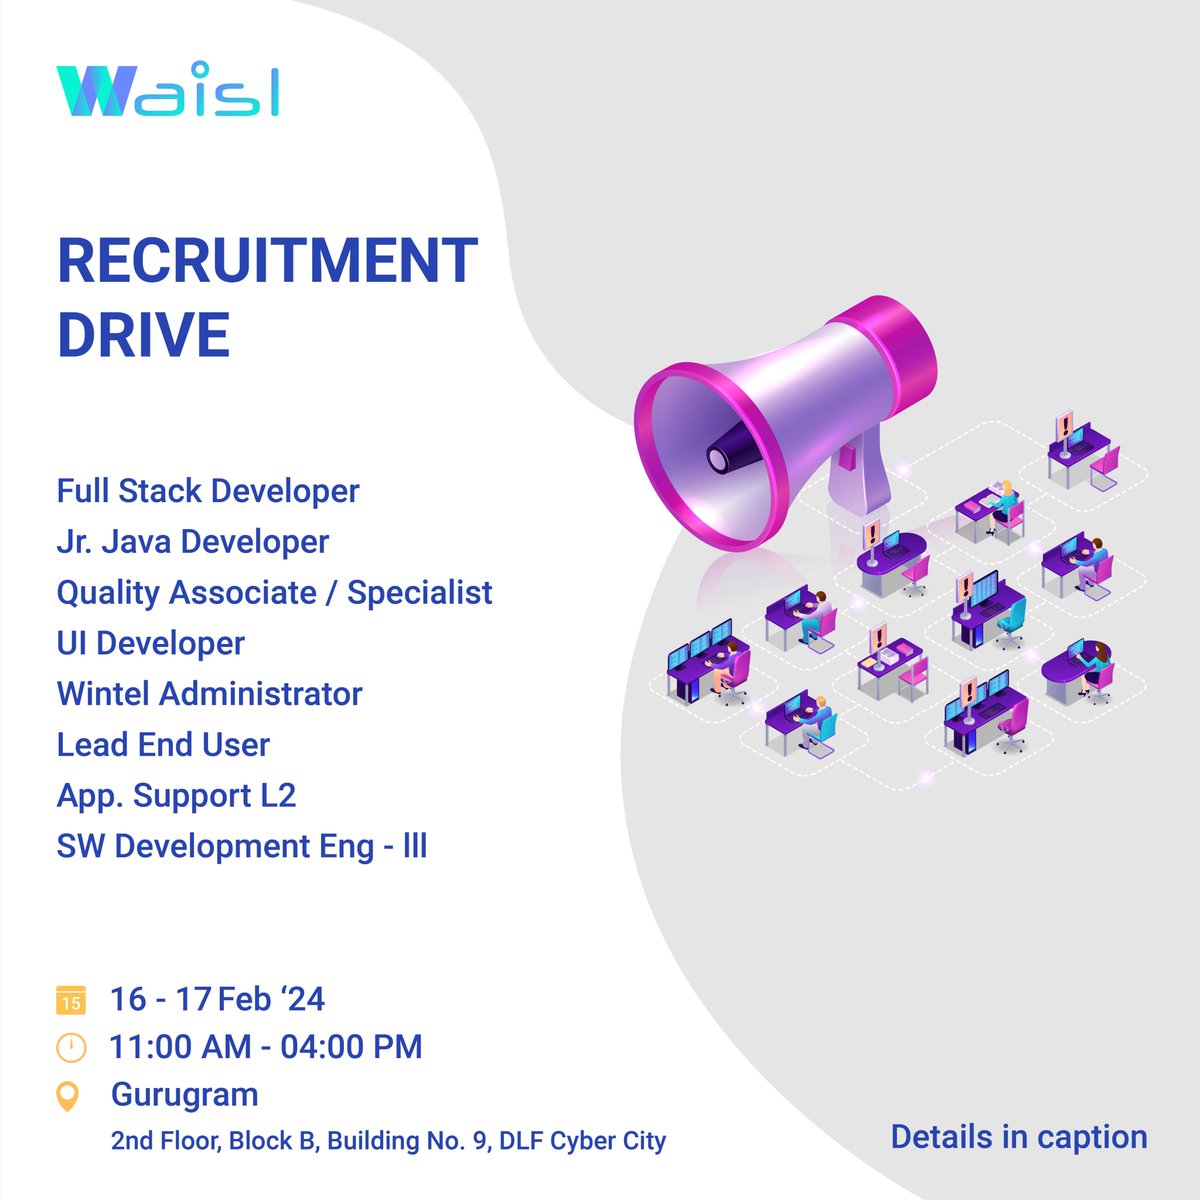 Whoa... the #WAISLVerse is expanding! We are looking for ambitious, driven individuals who are eager to take their careers to the next level. Are you game? Then join us at WAISL's #RecruitmentDrive!